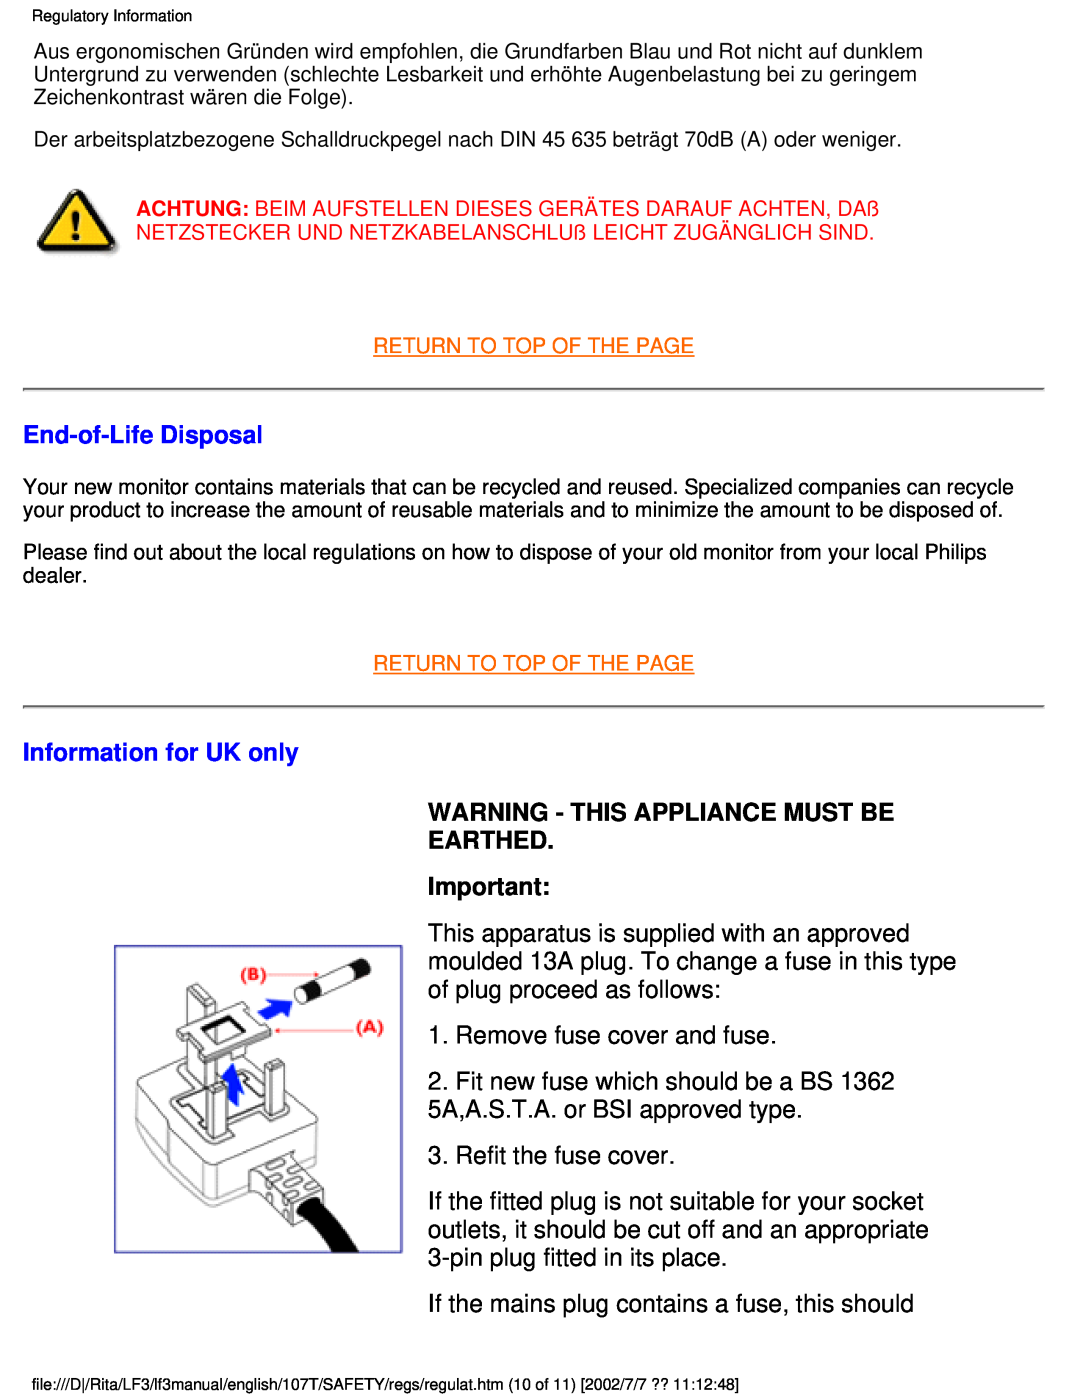 Philips 107T41 user manual End-of-Life Disposal, Information for UK only, Warning - This Appliance Must Be Earthed 